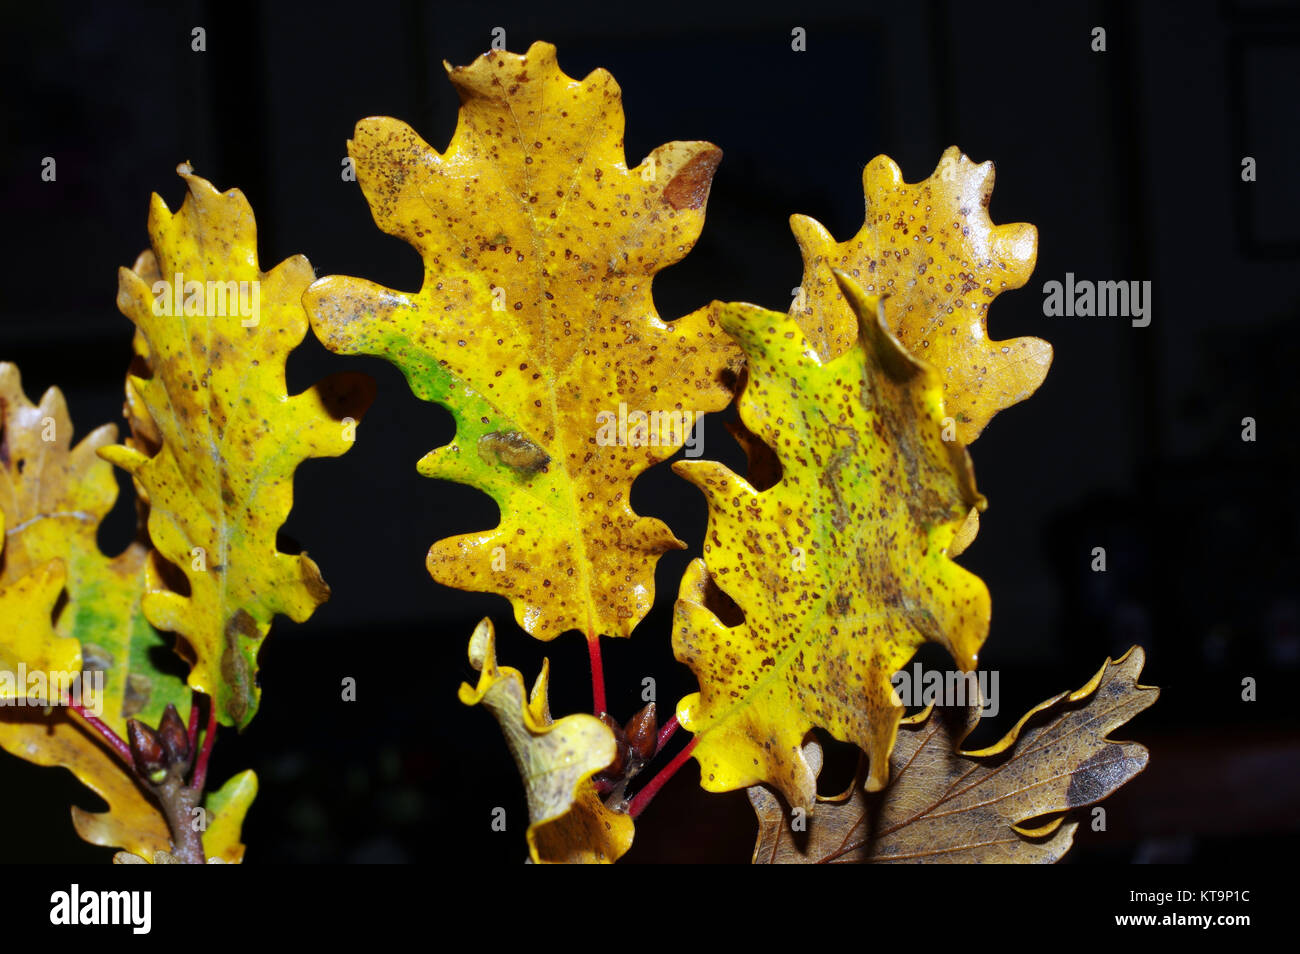 Leaves of quercus pubescens  in autumn close-up Stock Photo